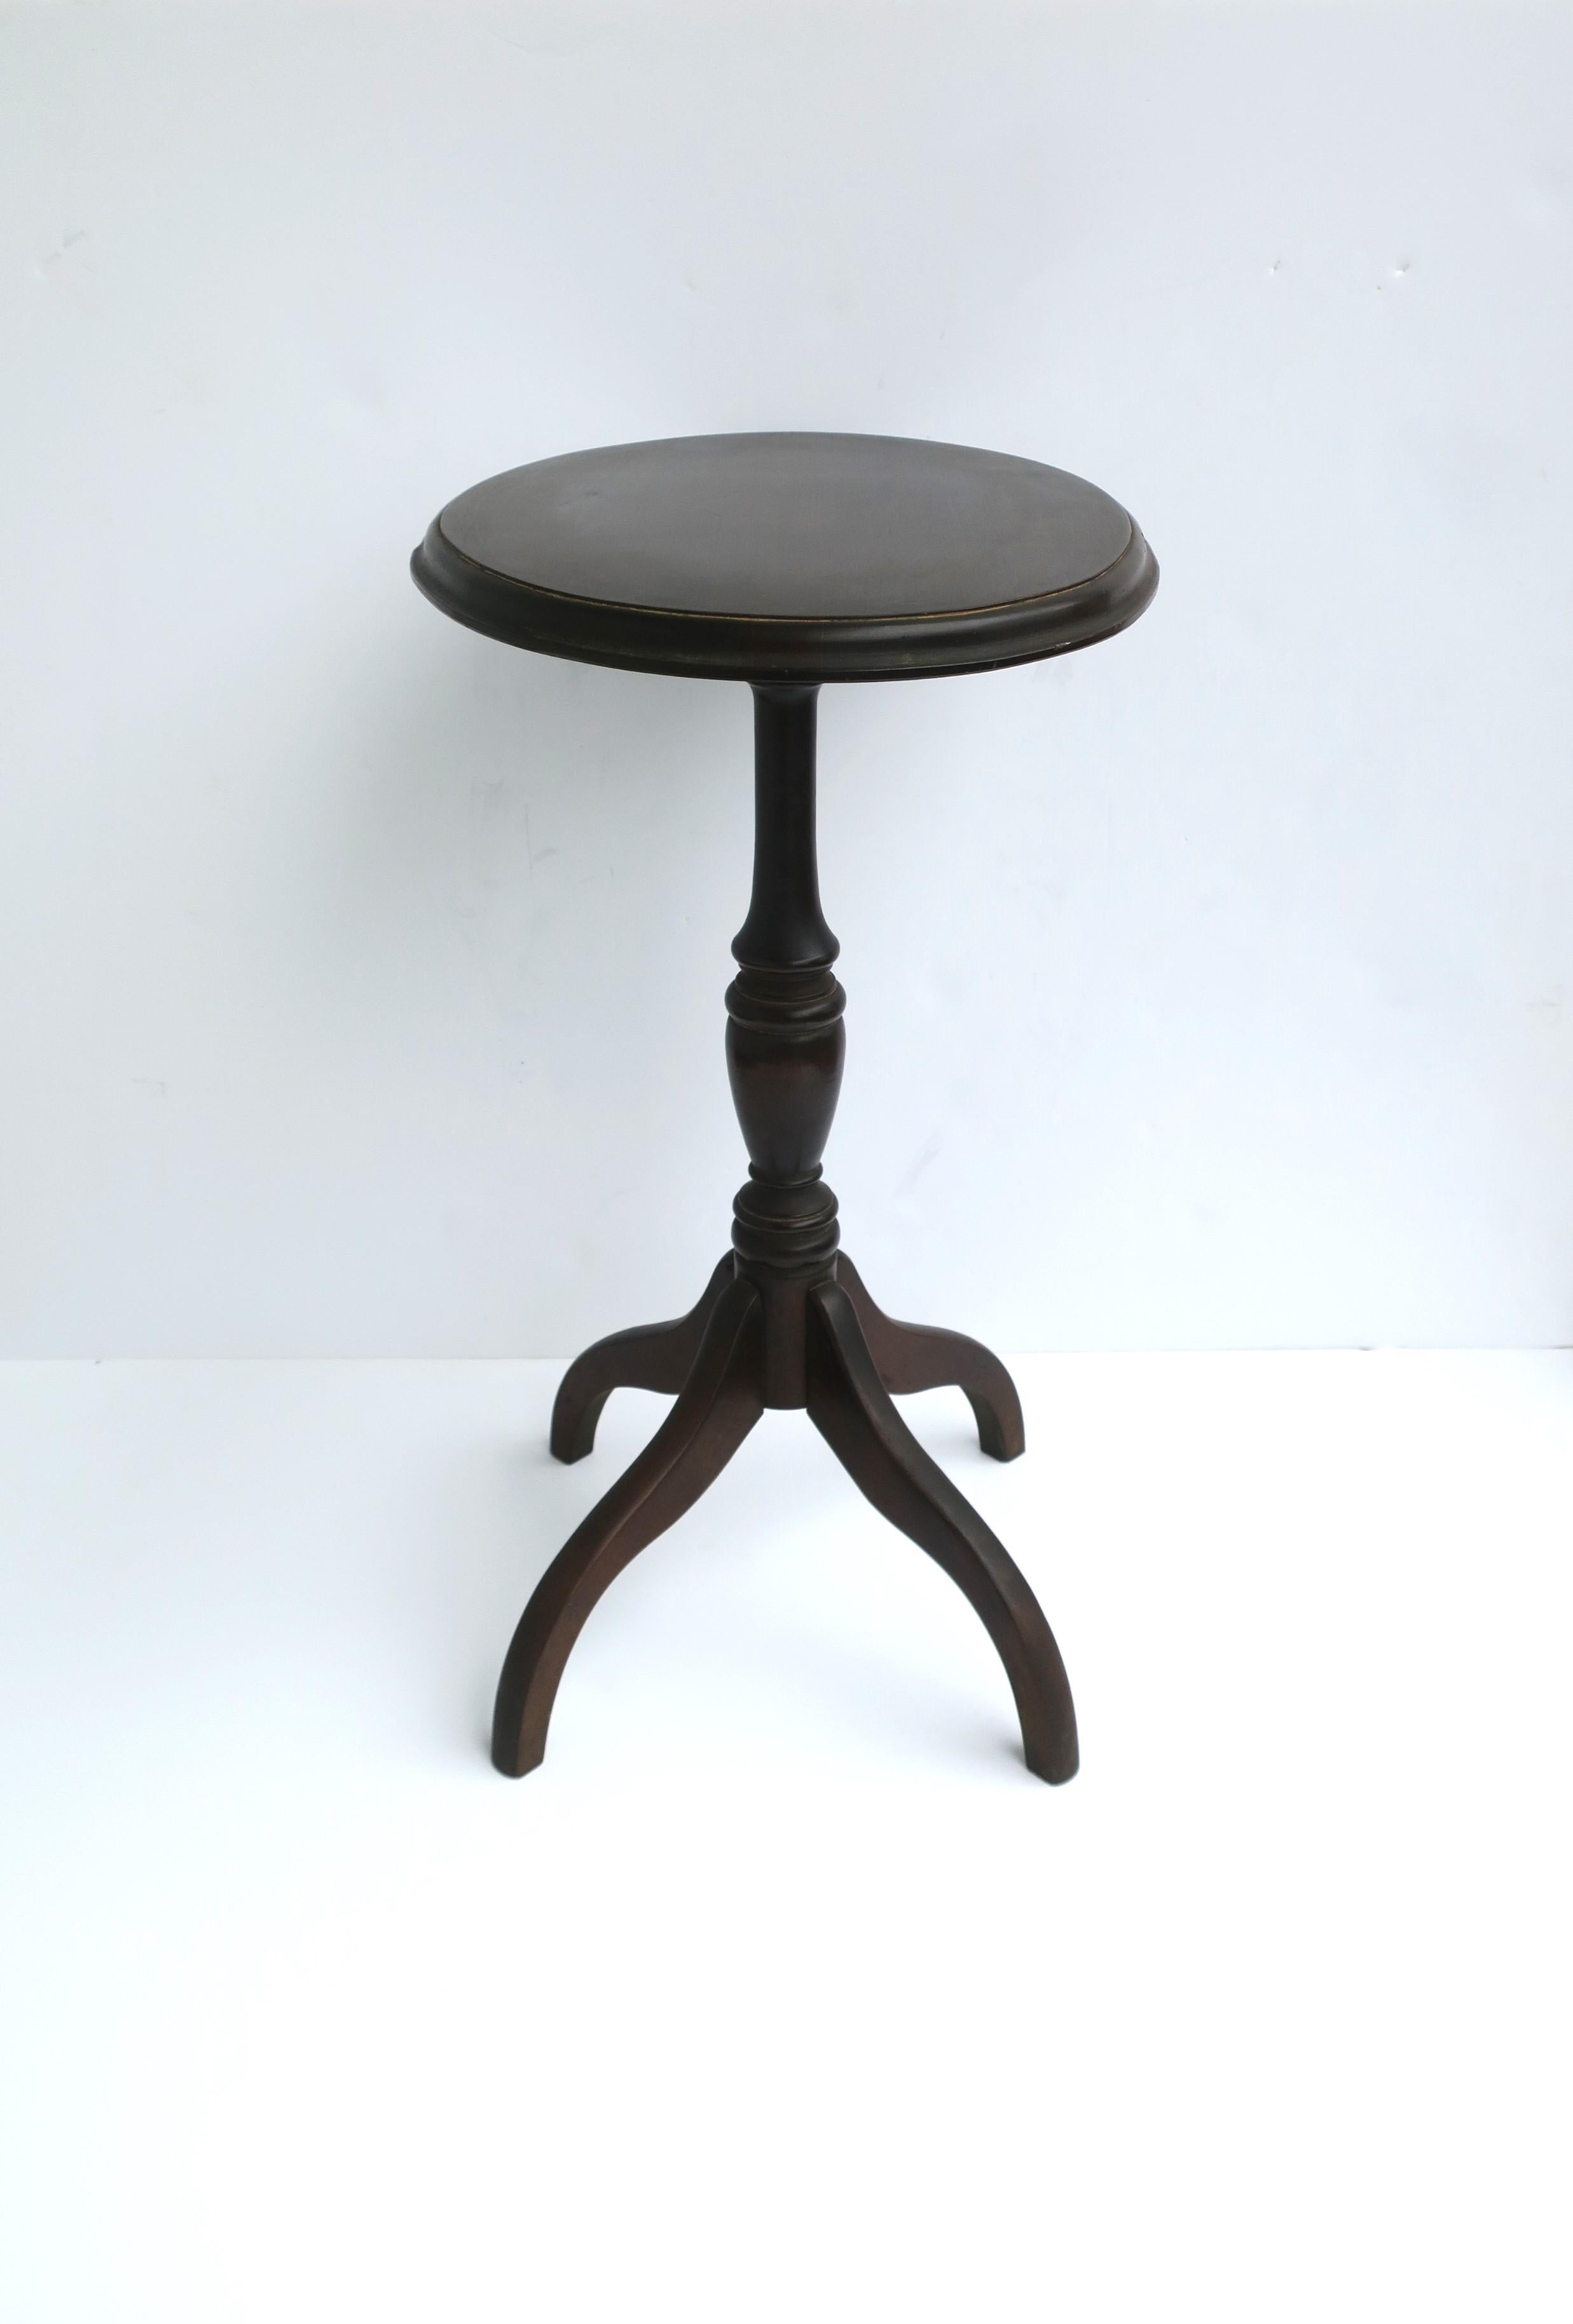 A Mahagany wood oval top side or drinks table, circa mid-20th century, USA. Table is also known as a 'candle stand table' referring to antique versions of tables' style/design. Table has a wood veneered oval top, turned neck and 'spider' legs. Piece